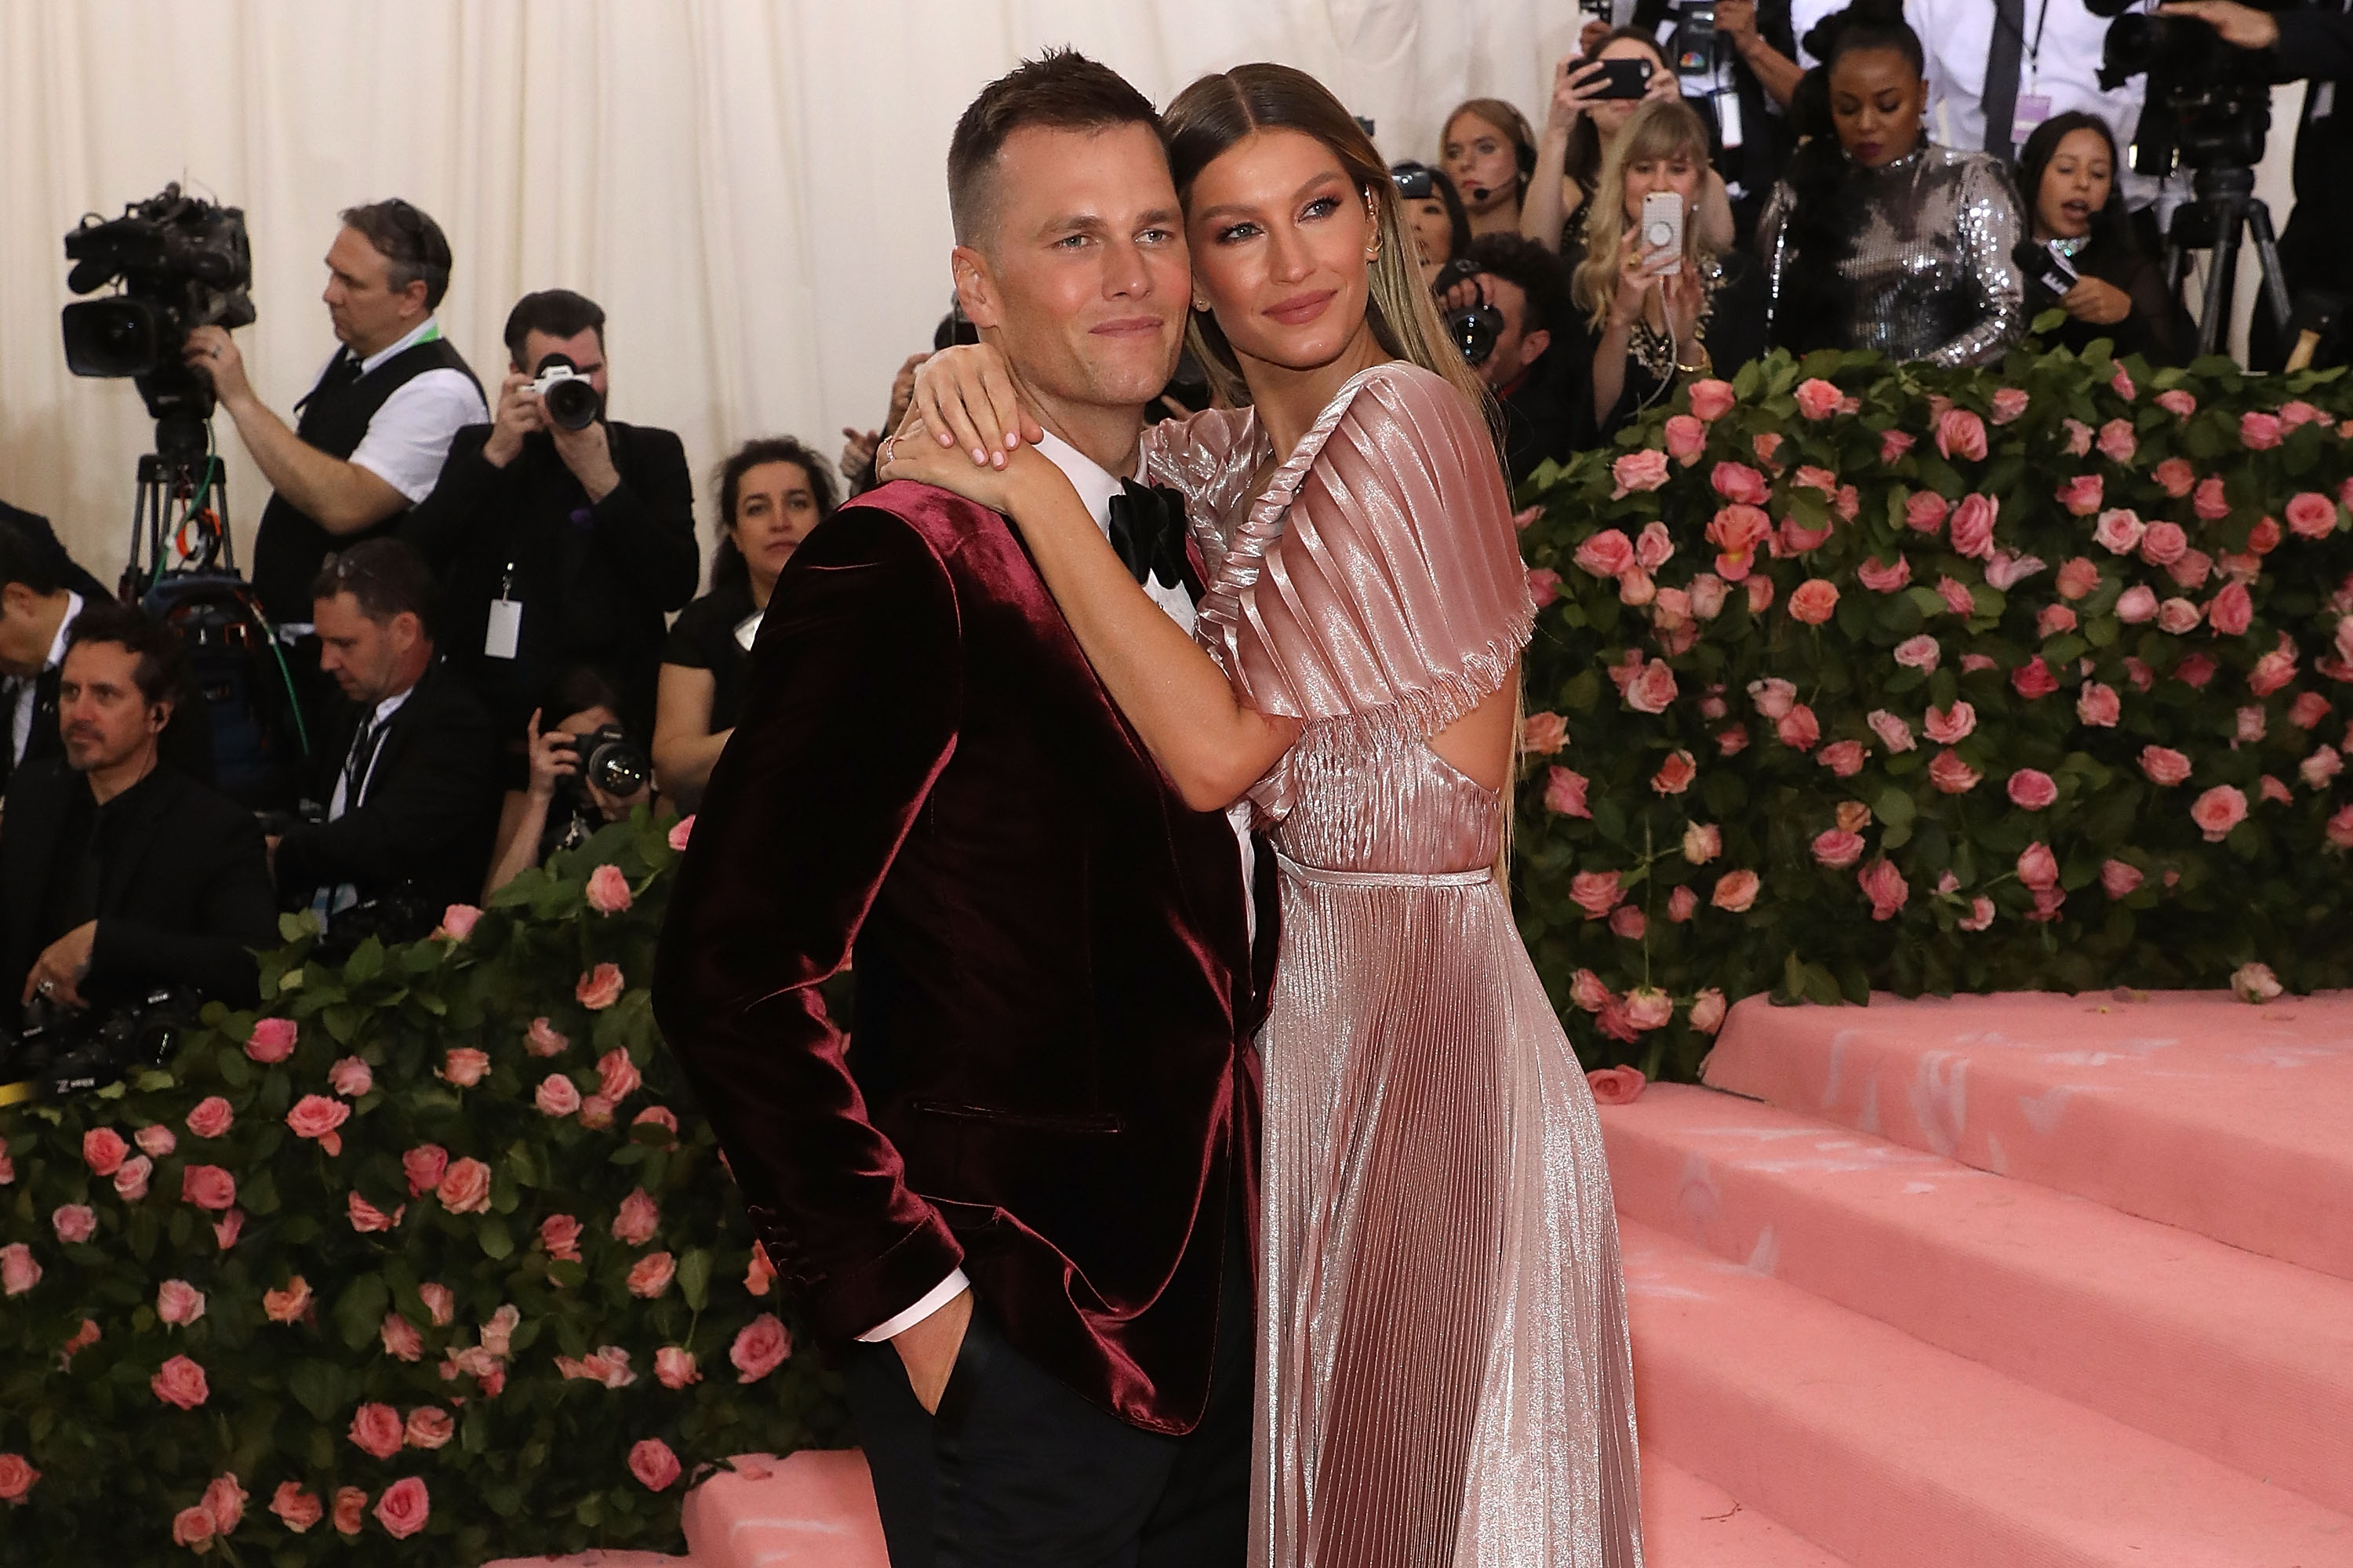 Gisele Bundchen and Tom Brady attend the 2019 Met Gala celebrating "Camp: Notes on Fashion" at The Metropolitan Museum of Art on May 6, 2019 in New York City | Source: Getty Images